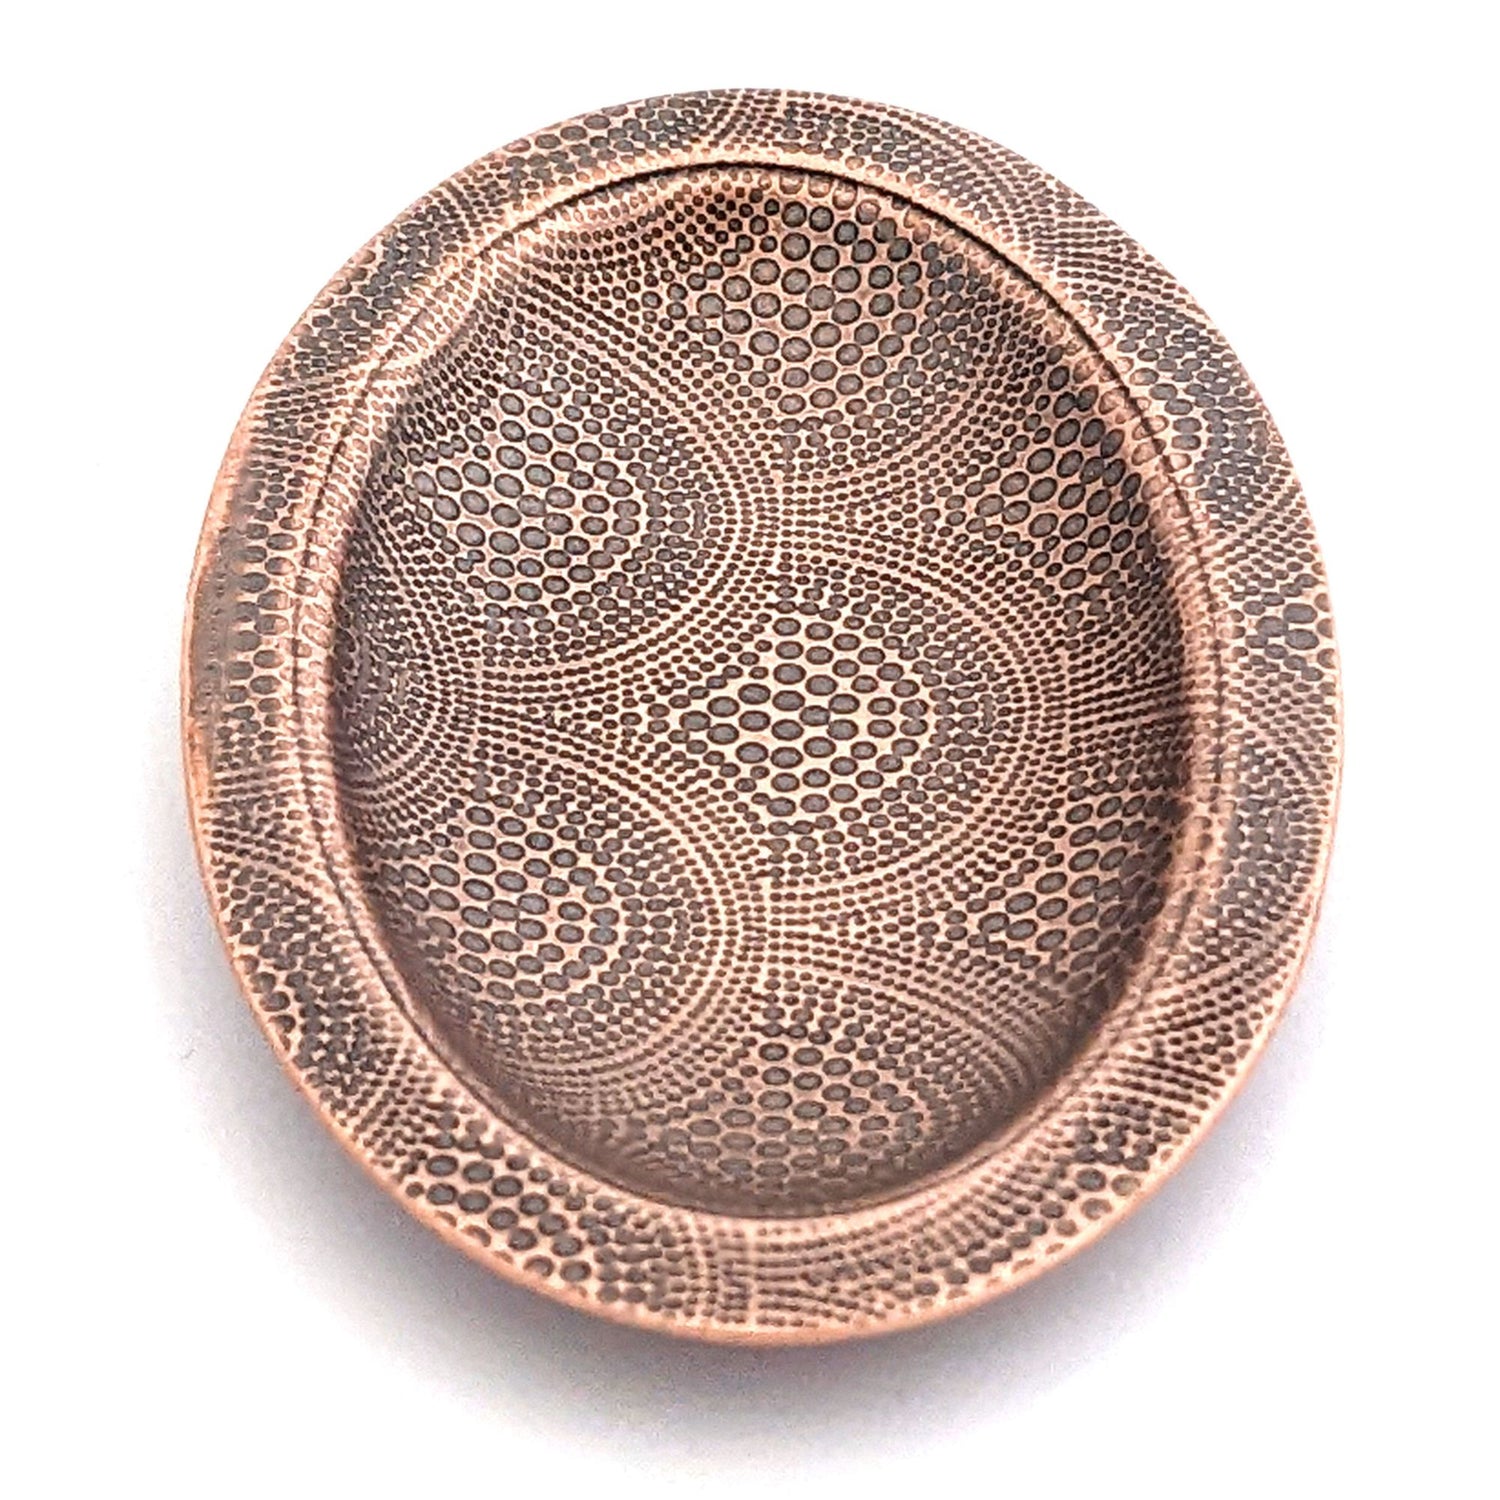 Copper oval ring dish with repeating pattern of dotted arches.  Dish is 2 inches by three inches with a raised lip.